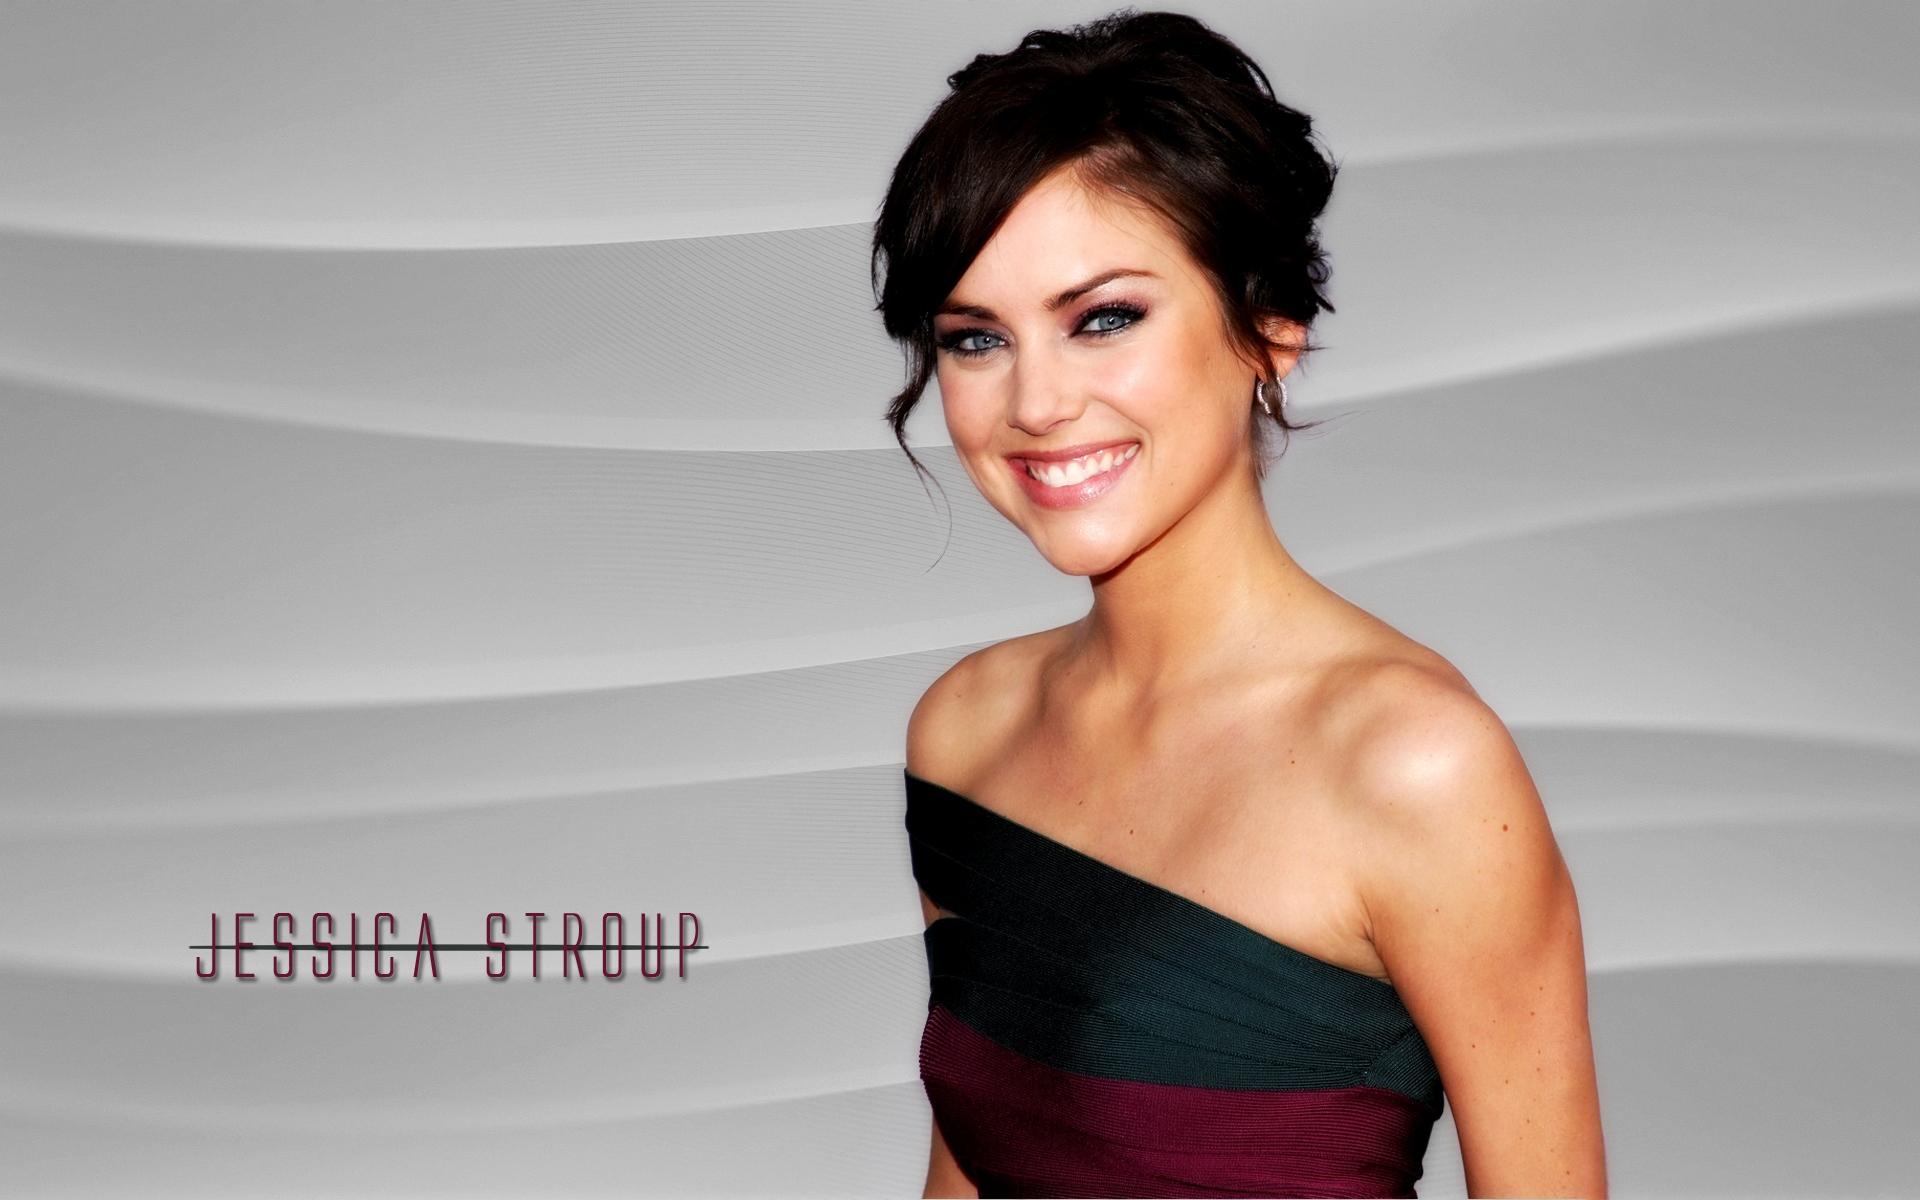 34-facts-about-jessica-stroup